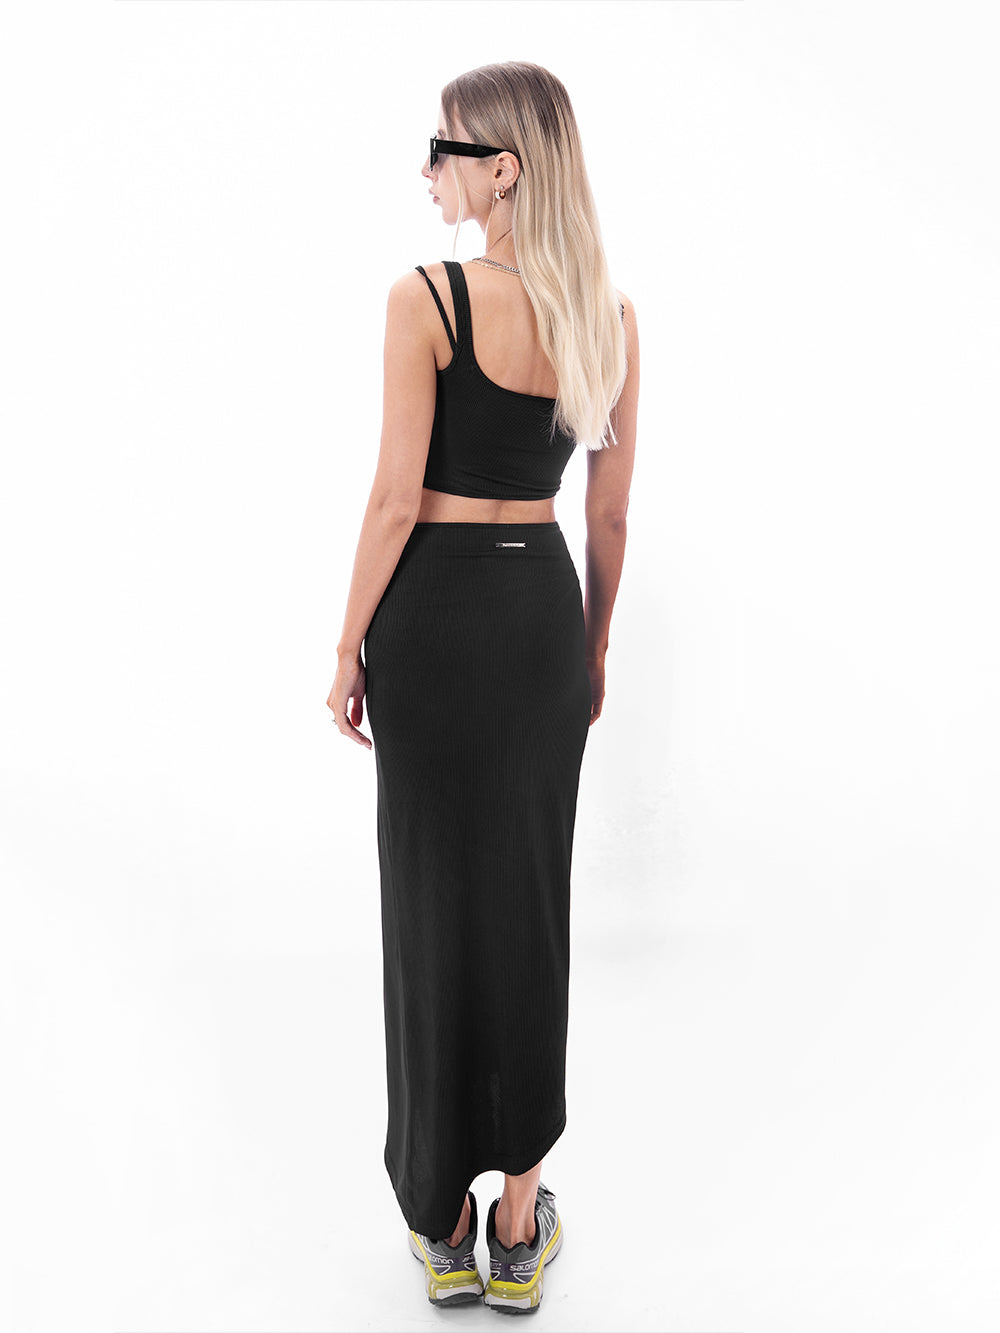 MUKTANK X Jqwention Black Knited Hollowed-out Dress